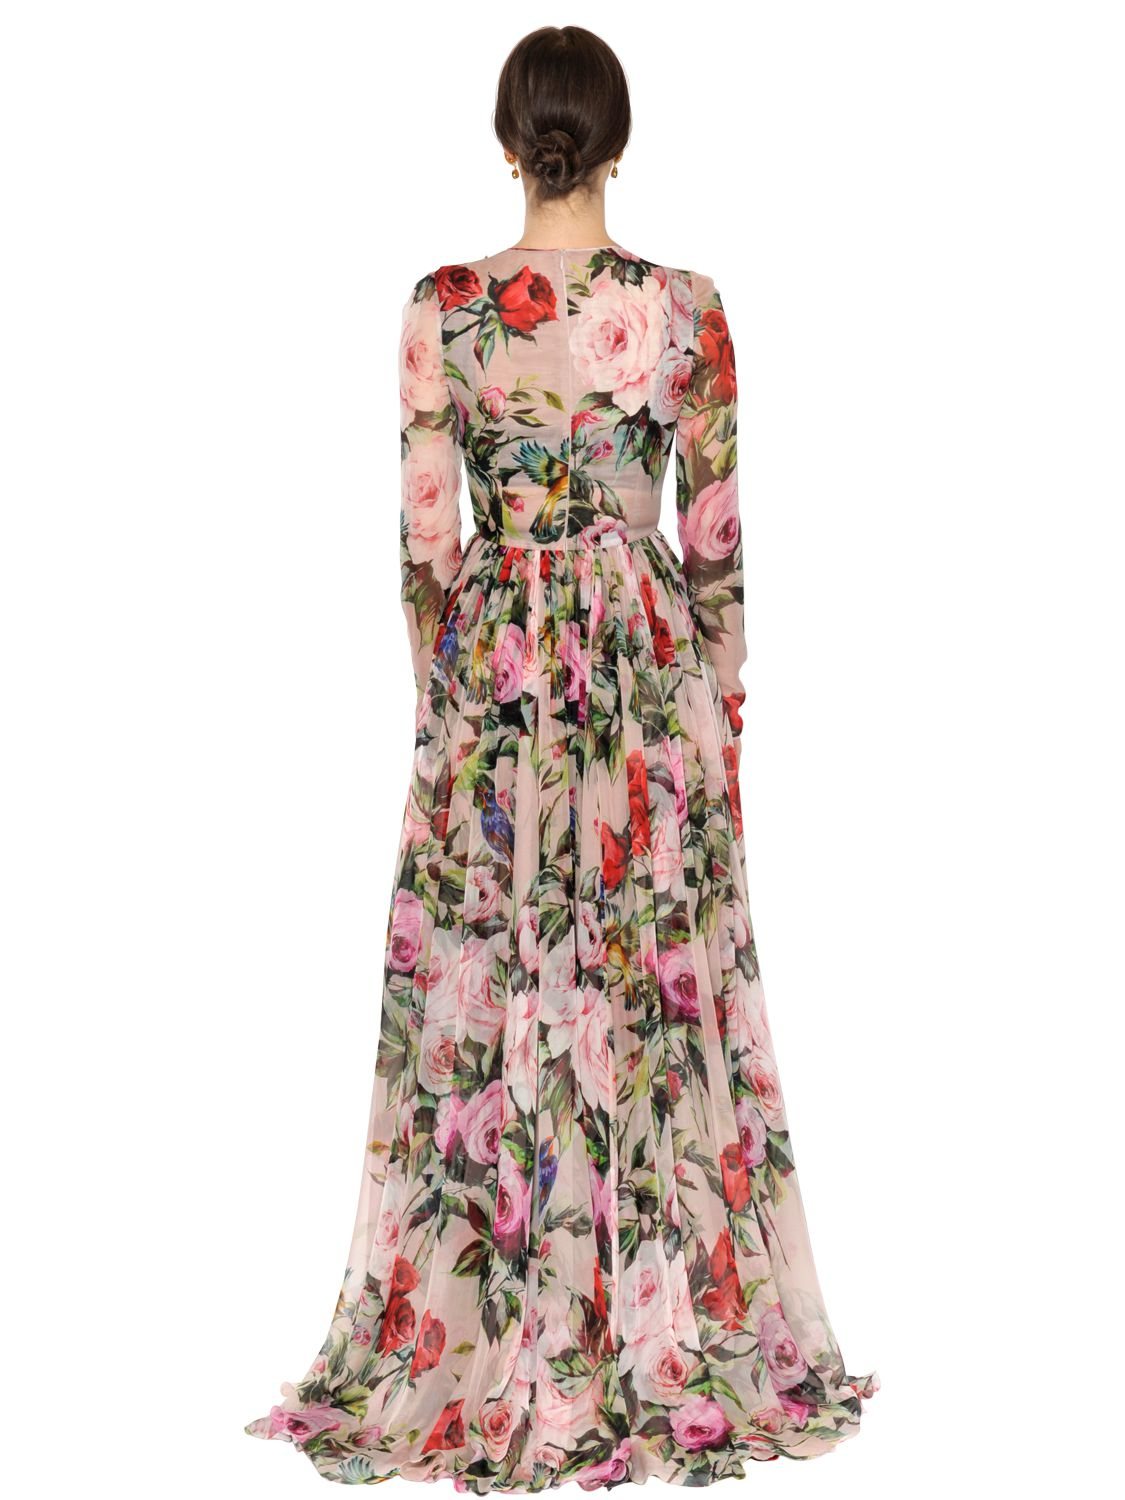 Dolce & Gabbana Embellished Roses Print Silk Voile Dress in Green - Lyst